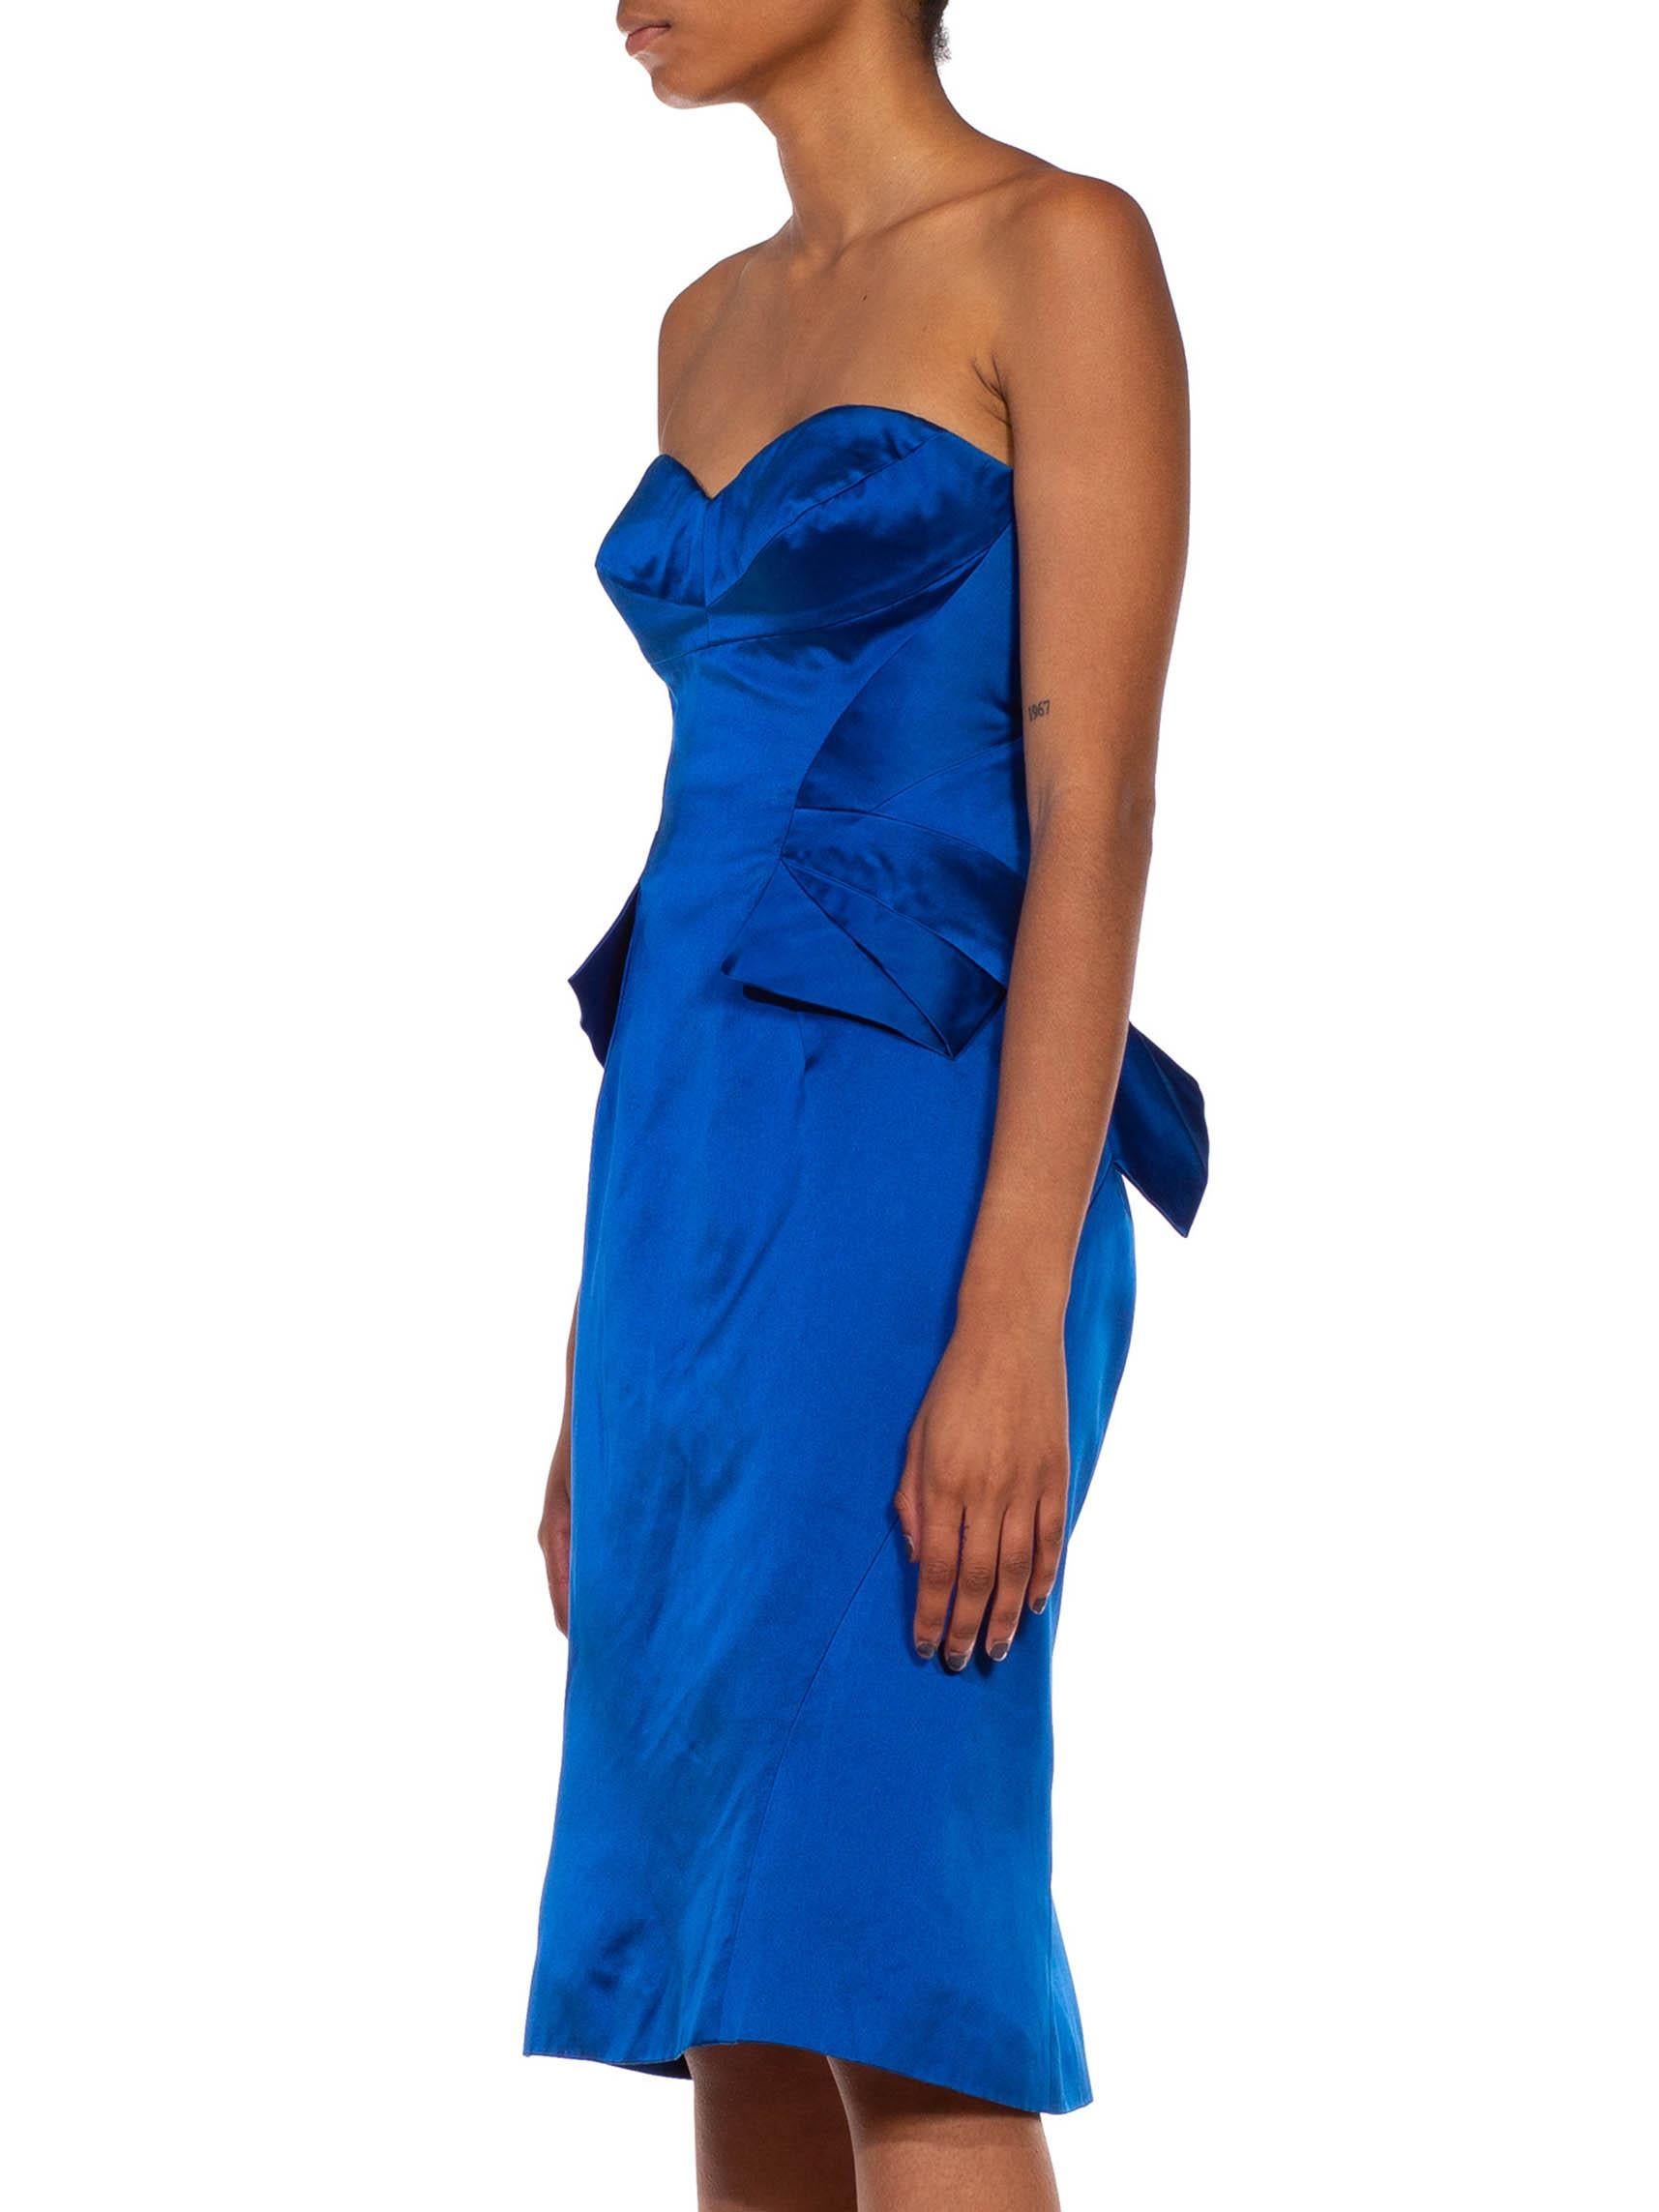 Beautifully made with a classic Dior Haute Couture style internal corselette.  2000S ZAC POSEN Electric Blue  Silk Duchess Satin Strapless Cocktail Dress 